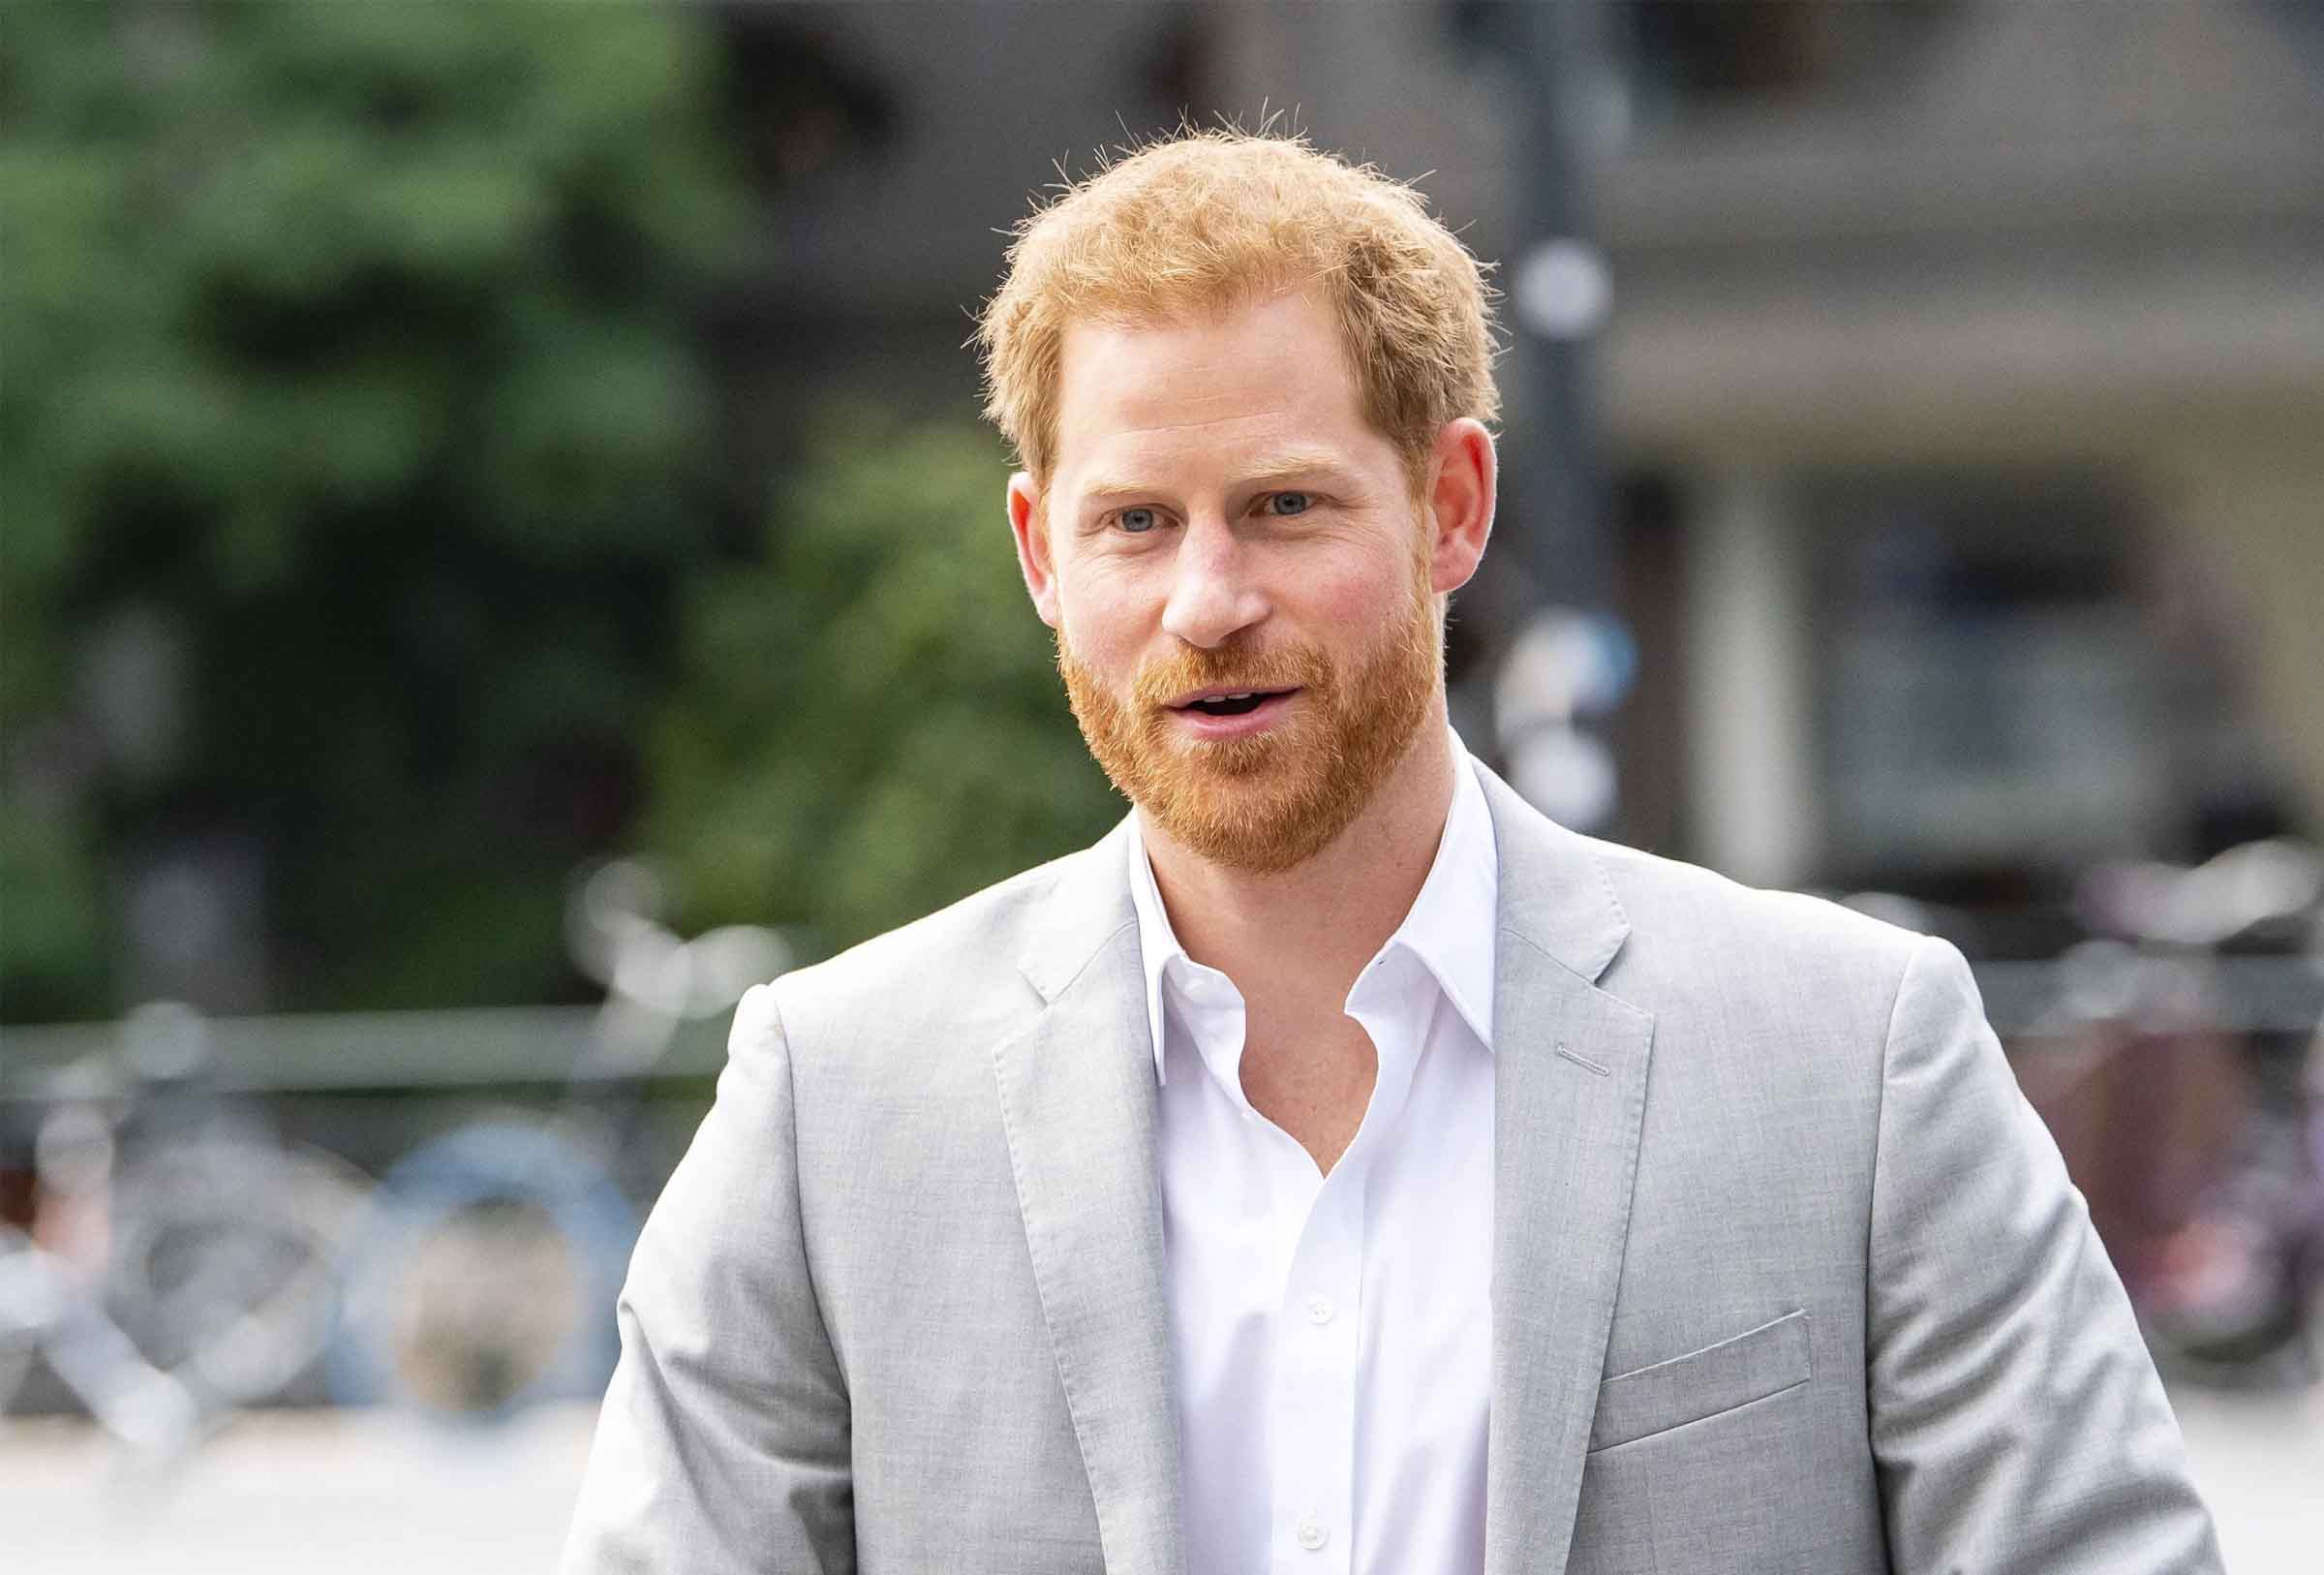 Has Prince Harry's net worth grown after leaving the Royal Family